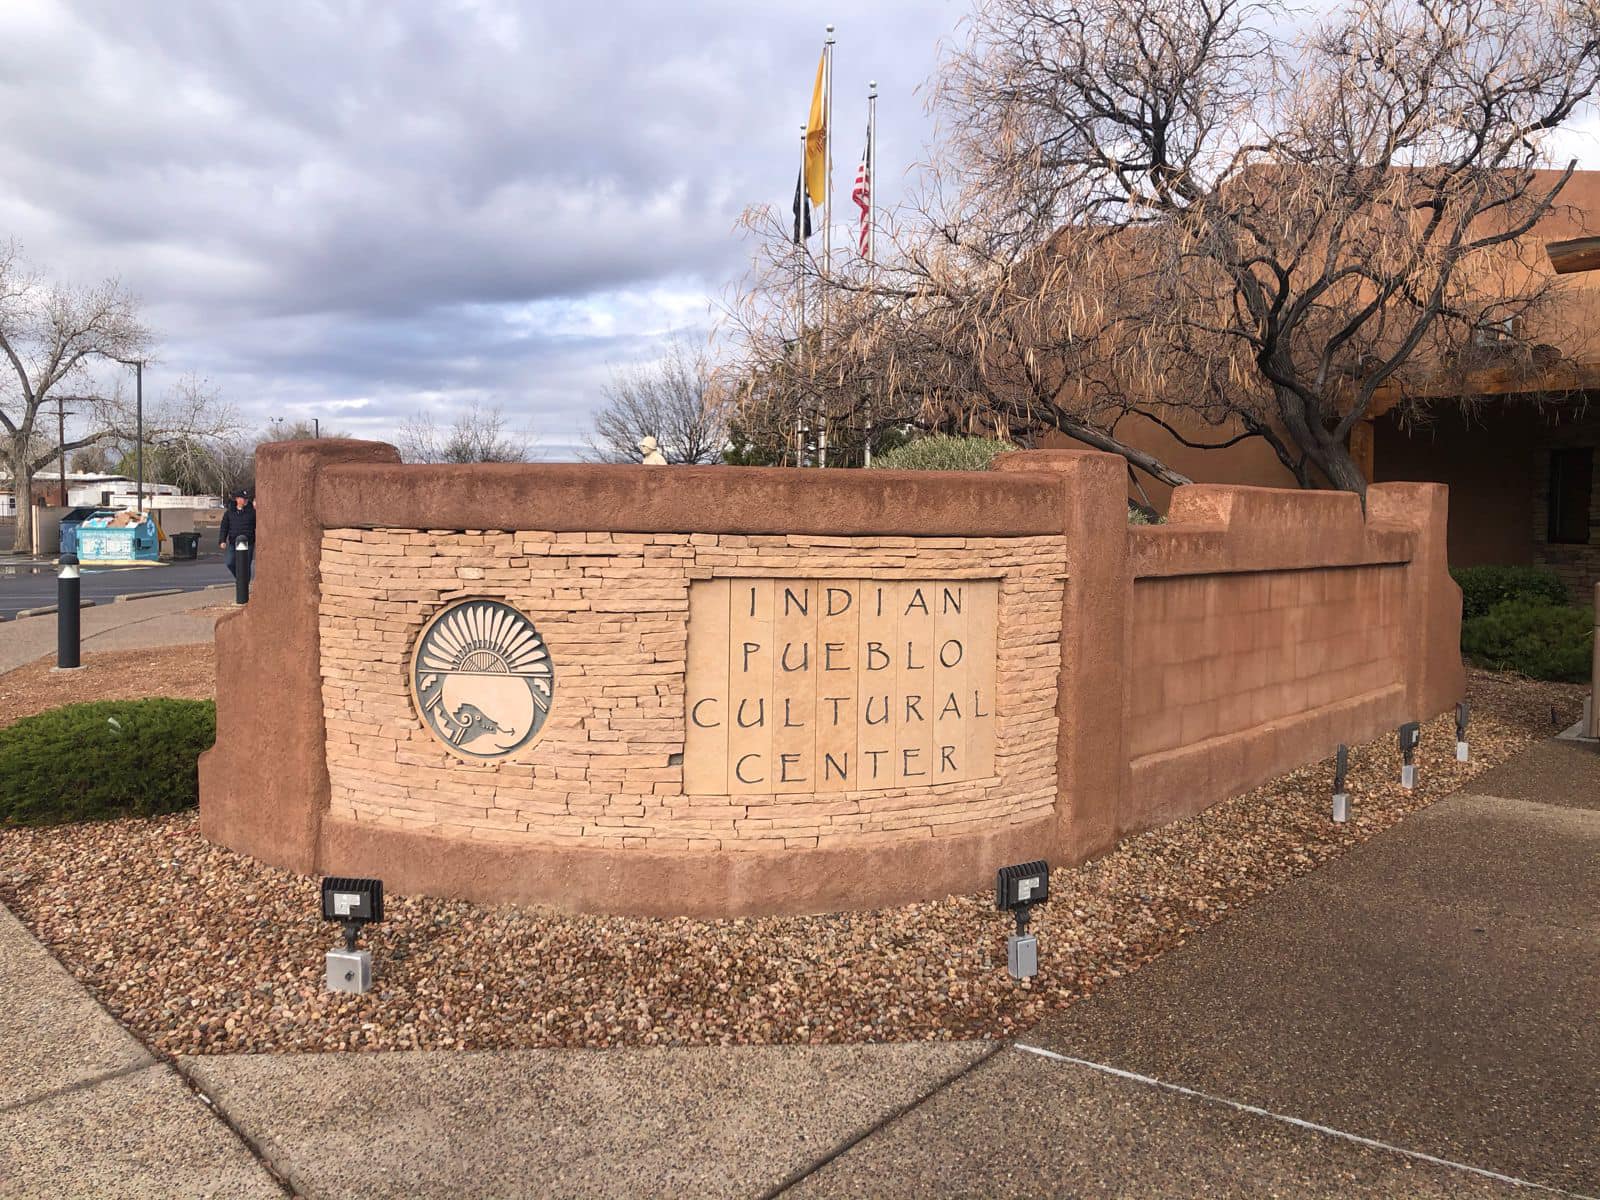 Meeting at the Indian Pueblo Cultural Center